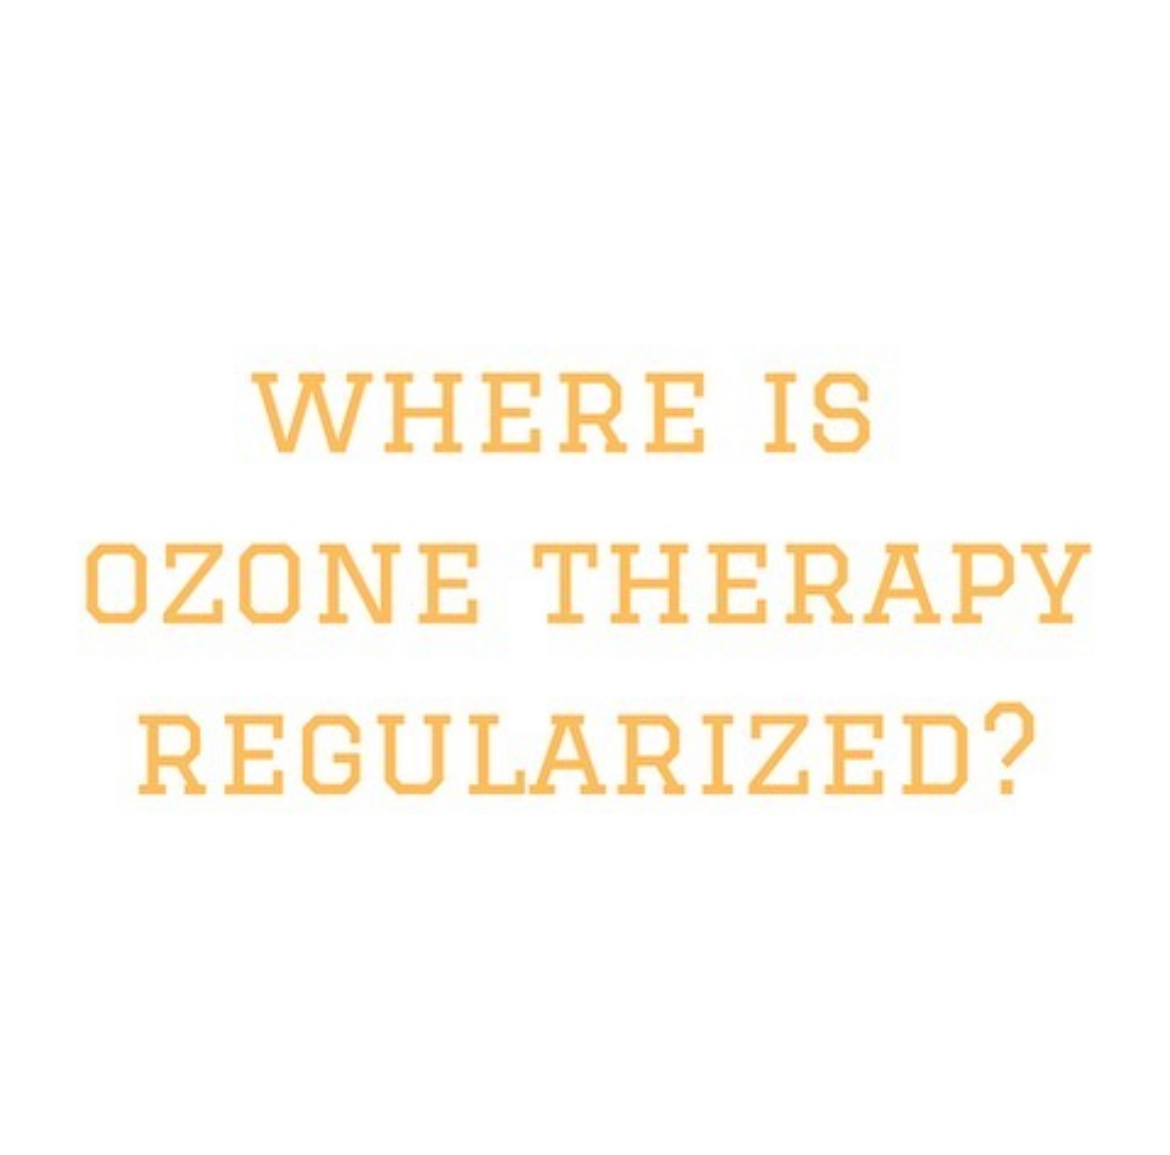 1/9

14 countries have regularized the practice of ozone therapy

#ozonetherapy #ozoneheals #naturalhealing #naturalhealth #medicalozone #takebackyourhealth #heavymetals #immunesystemsupport #fungalinfections #painreliever #cleanblood #circulation #krebscycle #healthyself